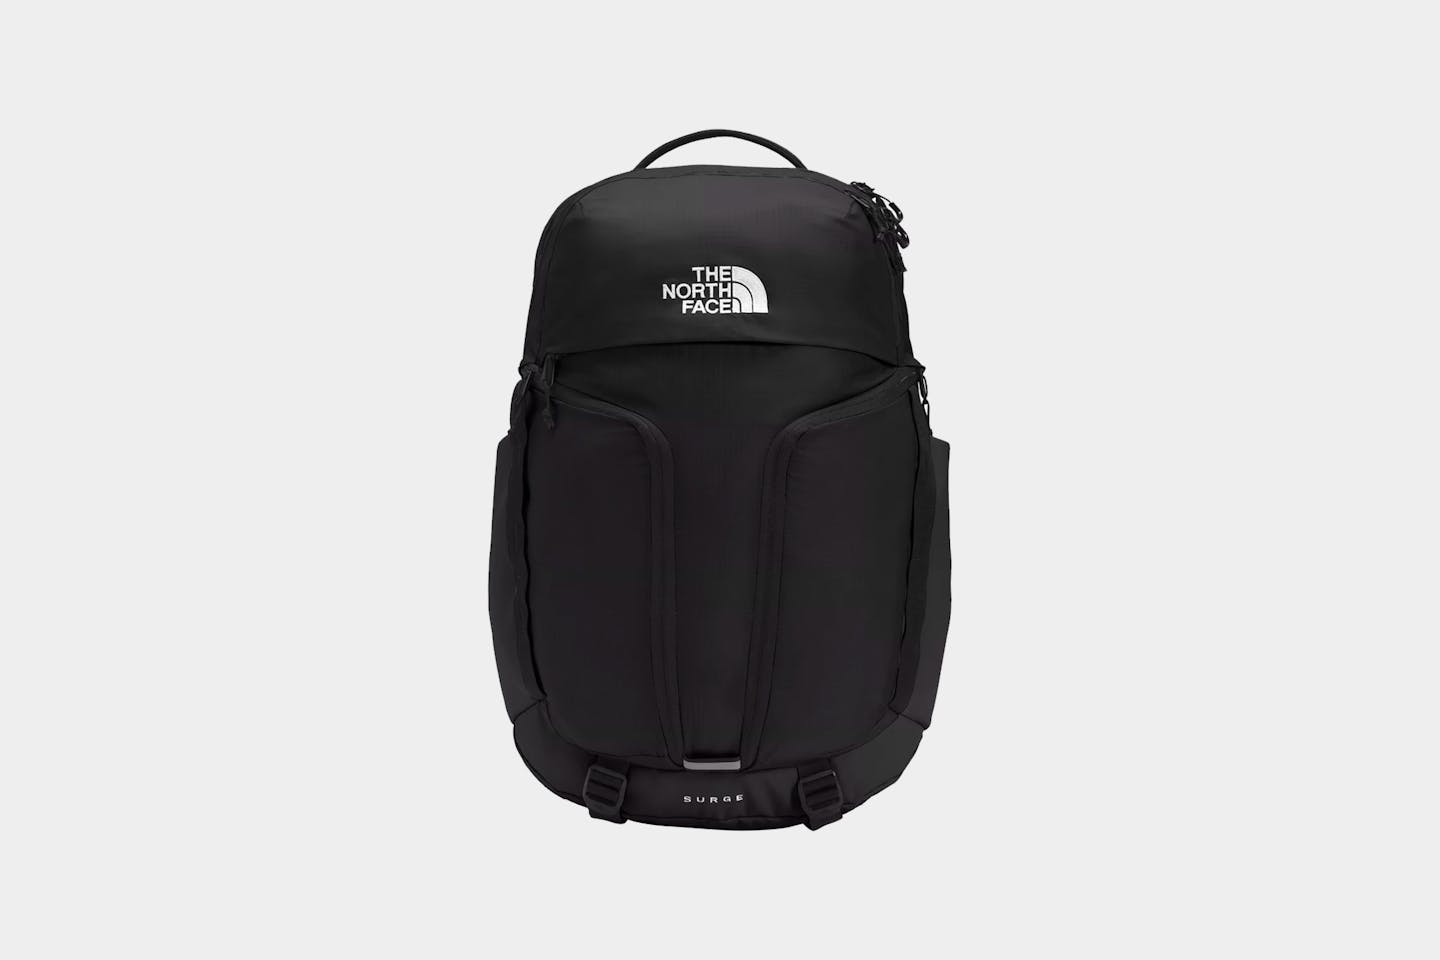 The North Face Surge Backpack Review | Pack Hacker